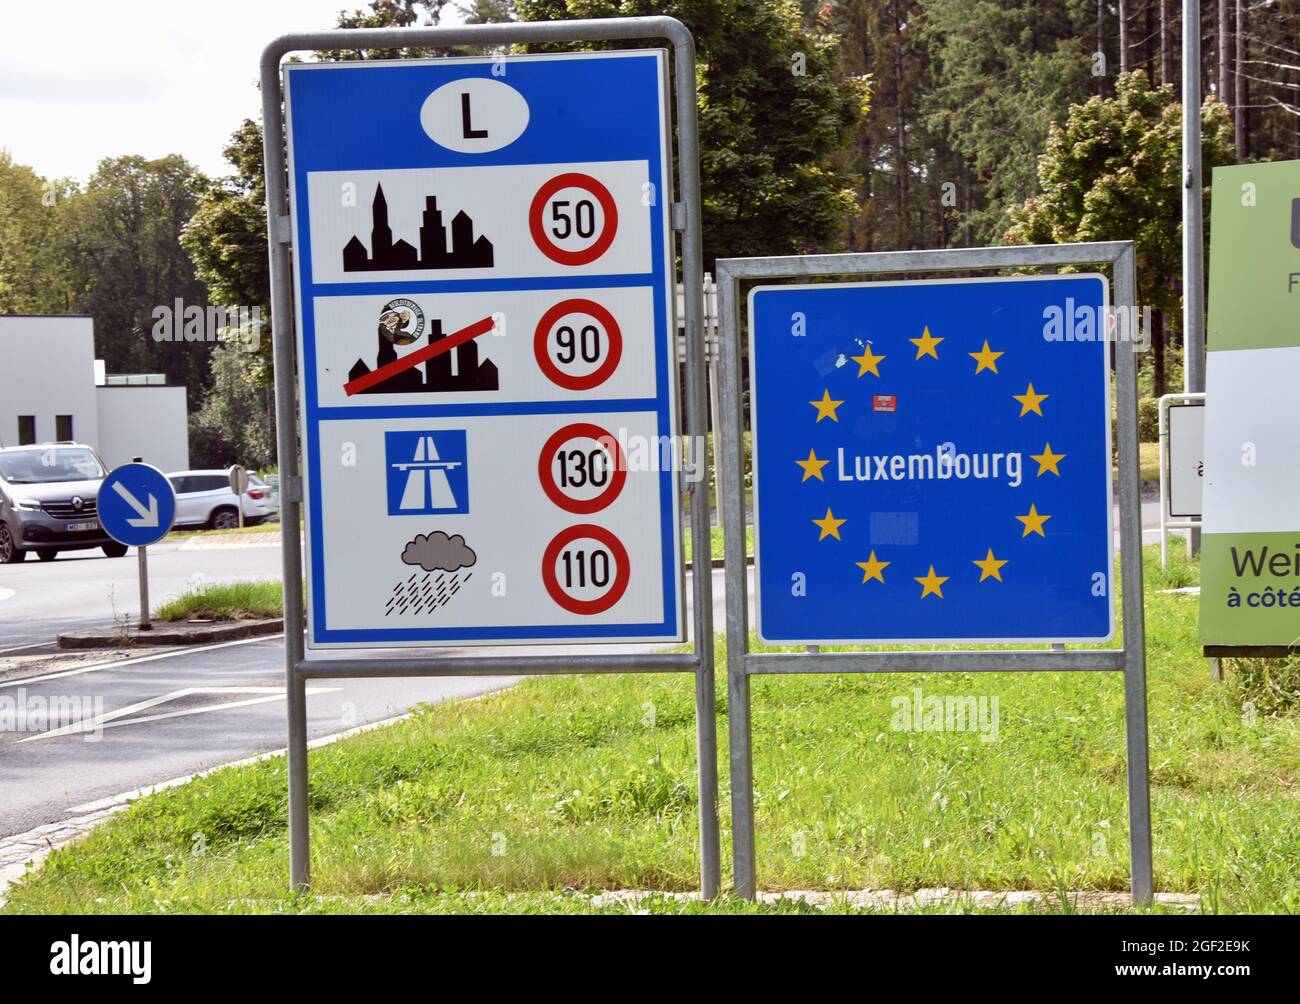 Wemperhardt, Luxembourg. 08th Aug, 2021. Border sign Luxembourg, bordered by Europe stars on blue background, at the German-Luxembourg border and sign at the border to Luxembourg shows speed limits on roads for Luxembourg Credit: Horst Galuschka/dpa/Horst Galuschka dpa/Alamy Live News Stock Photo